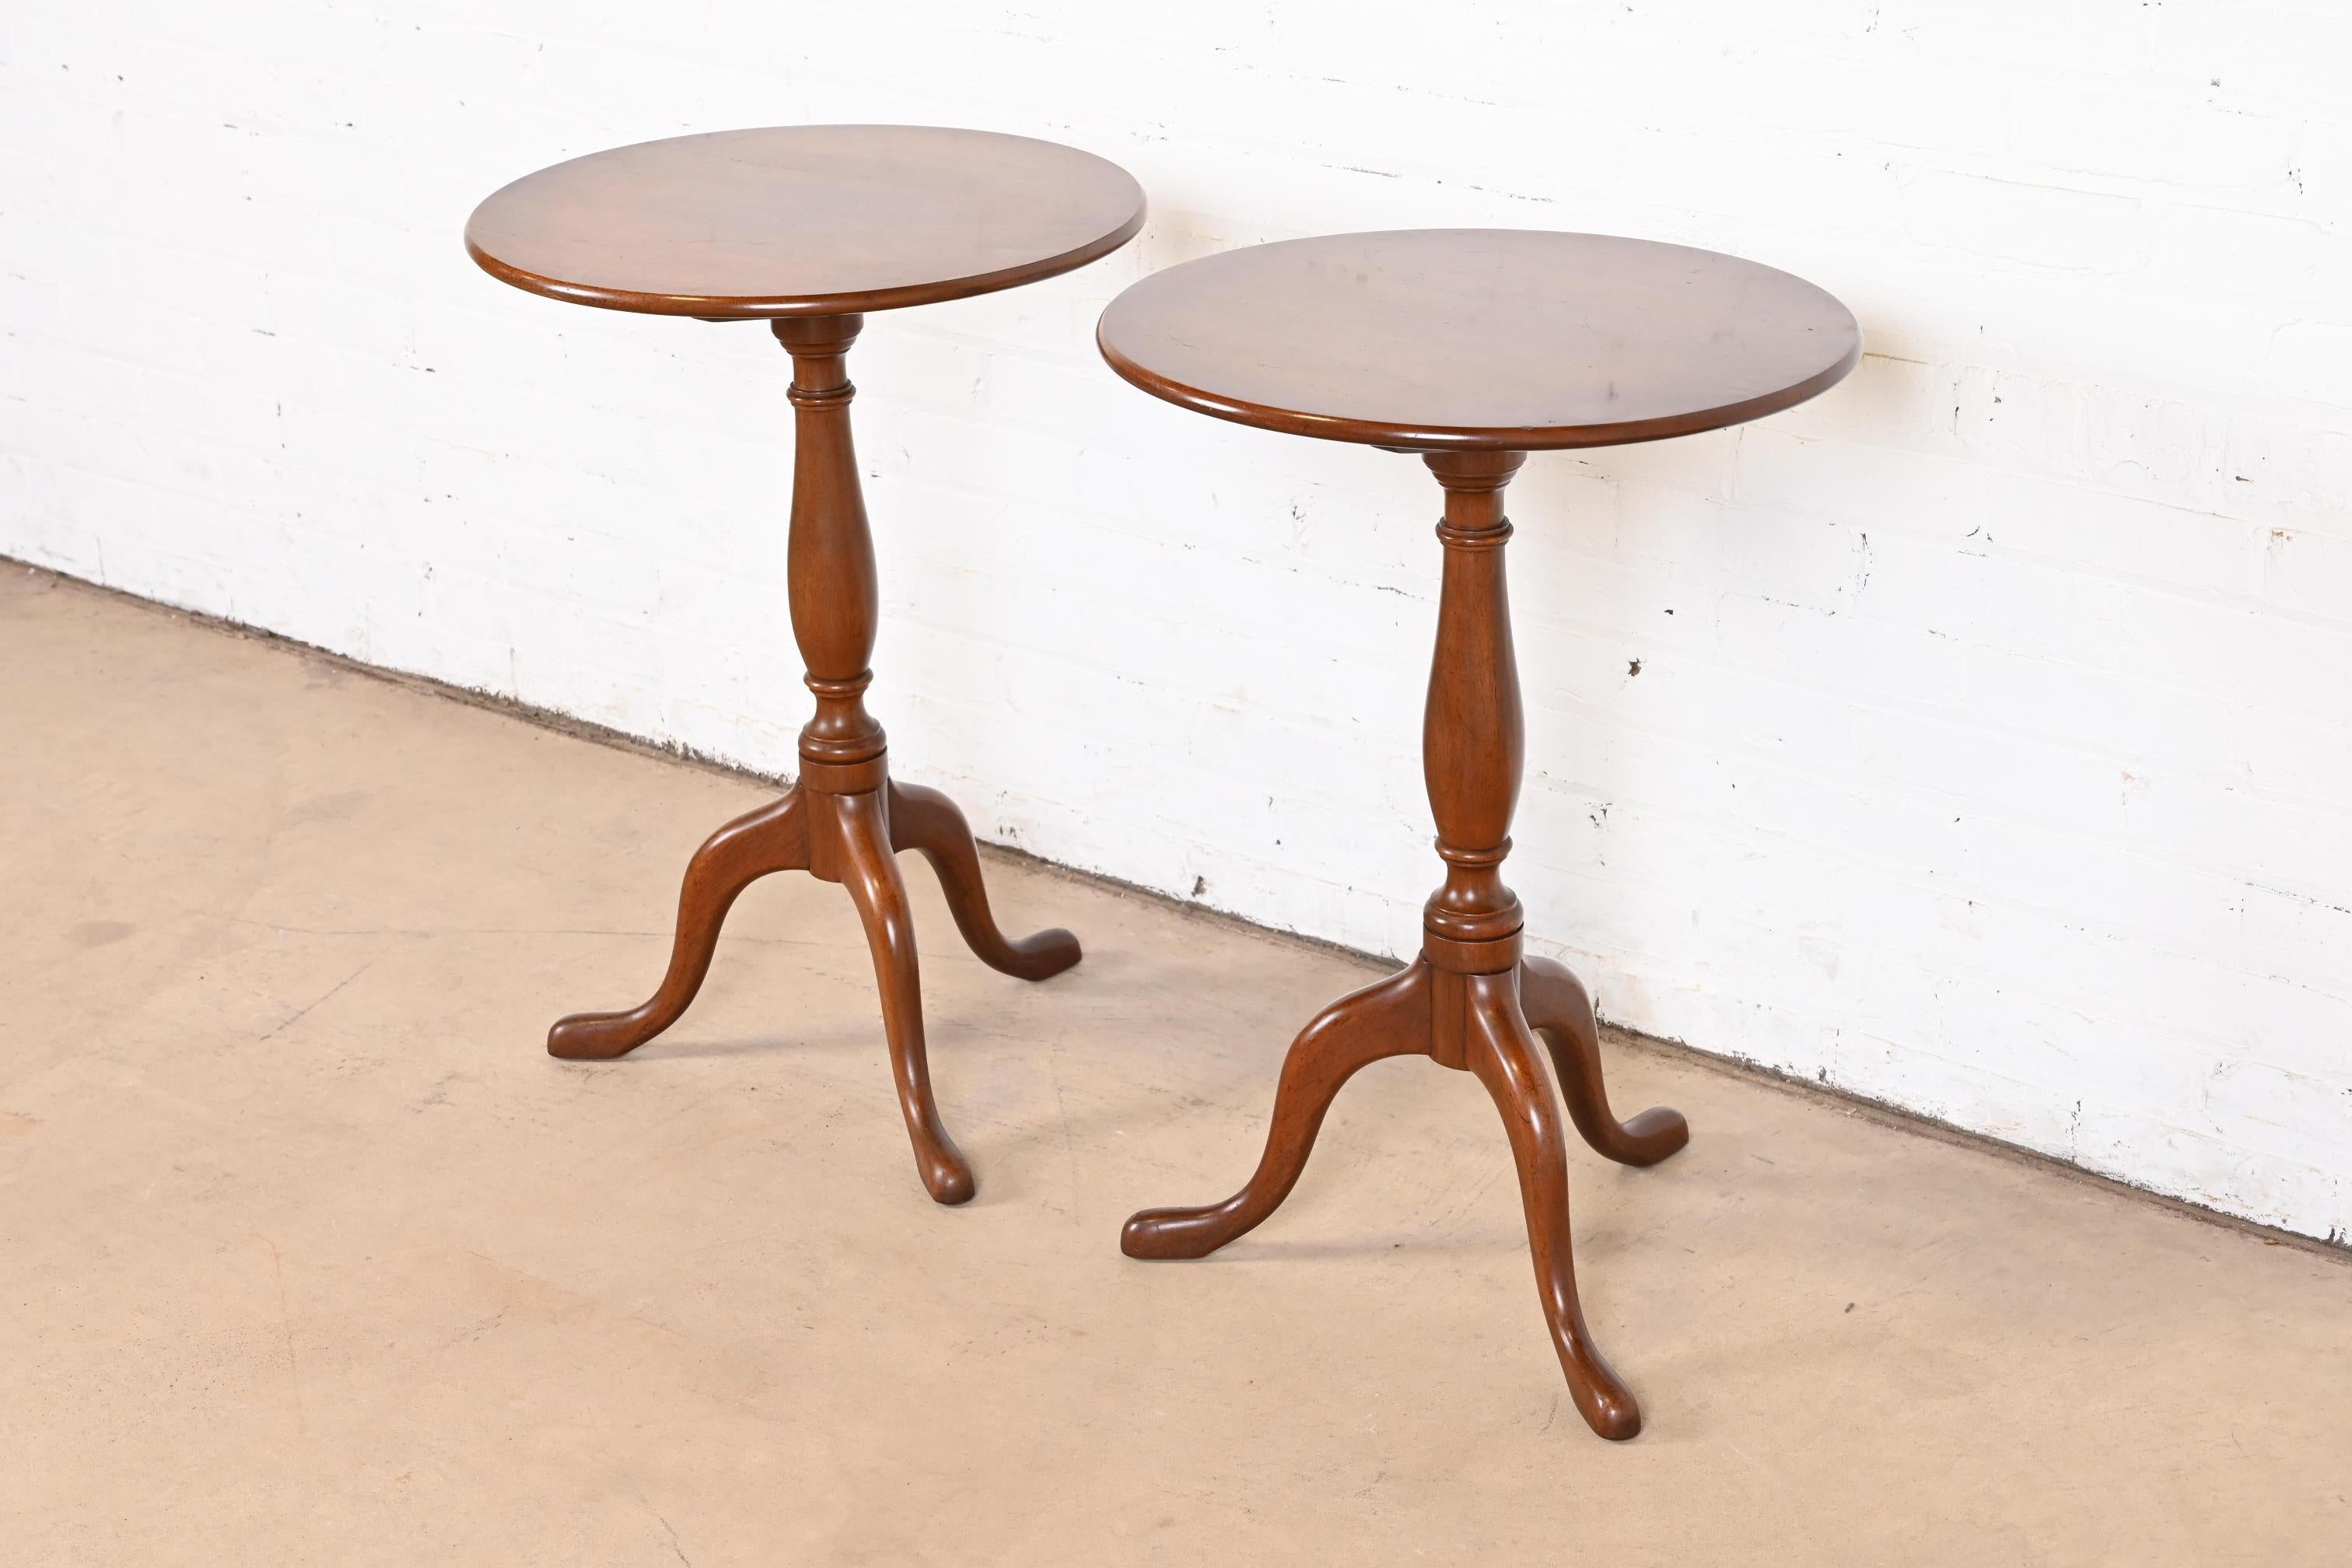 Kittinger Queen Anne Mahogany Tilt-Top Pedestal Tea Tables, Pair In Good Condition For Sale In South Bend, IN